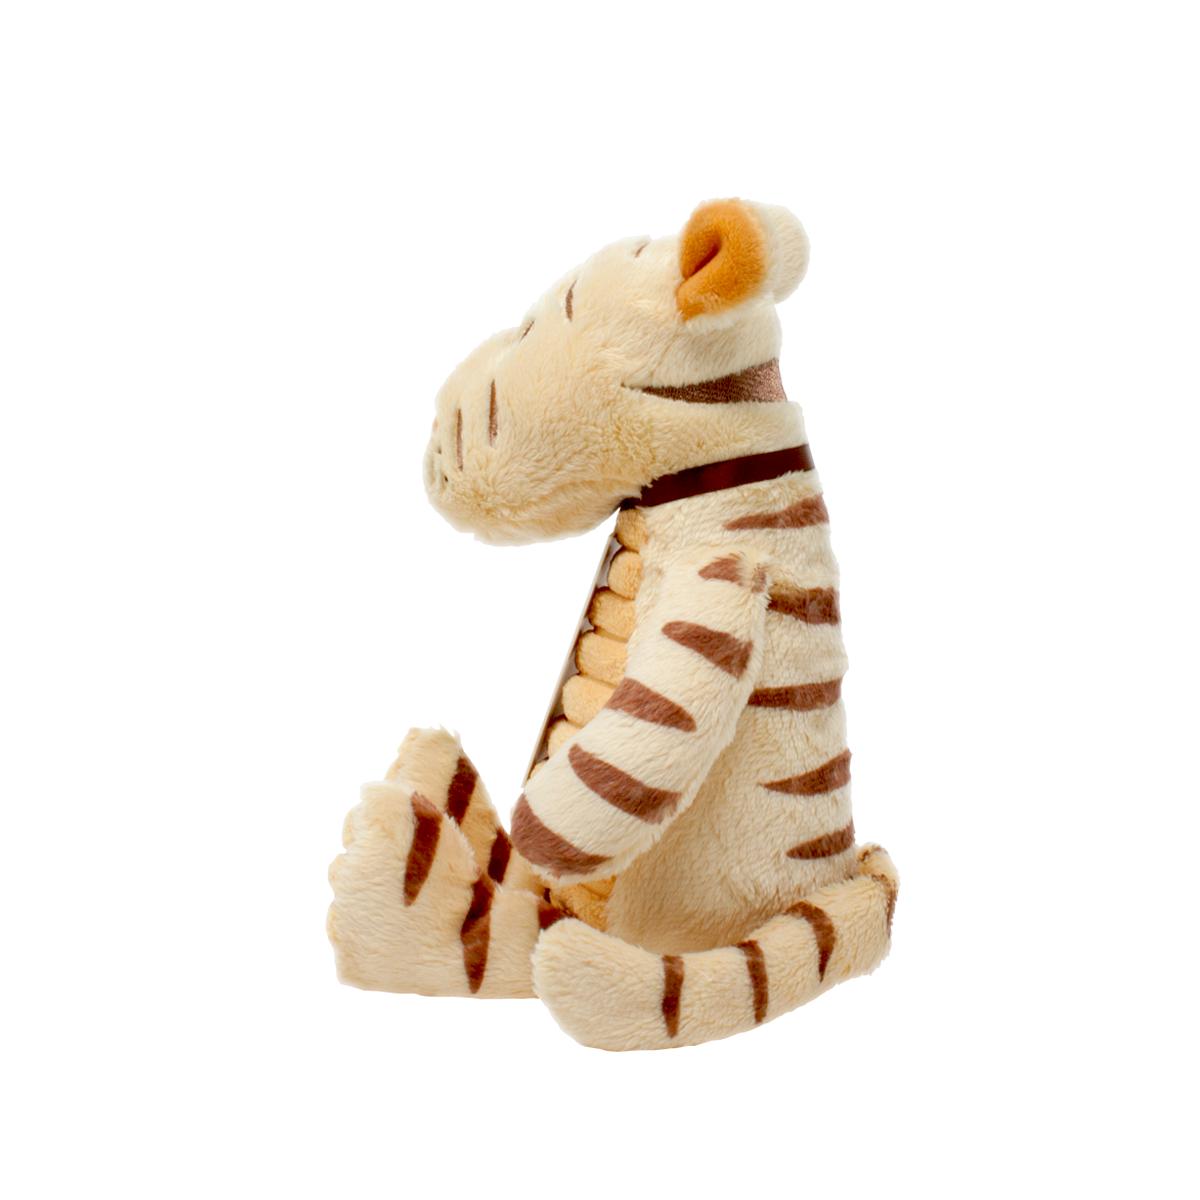 Hundred Acre Wood Tigger Soft Toy